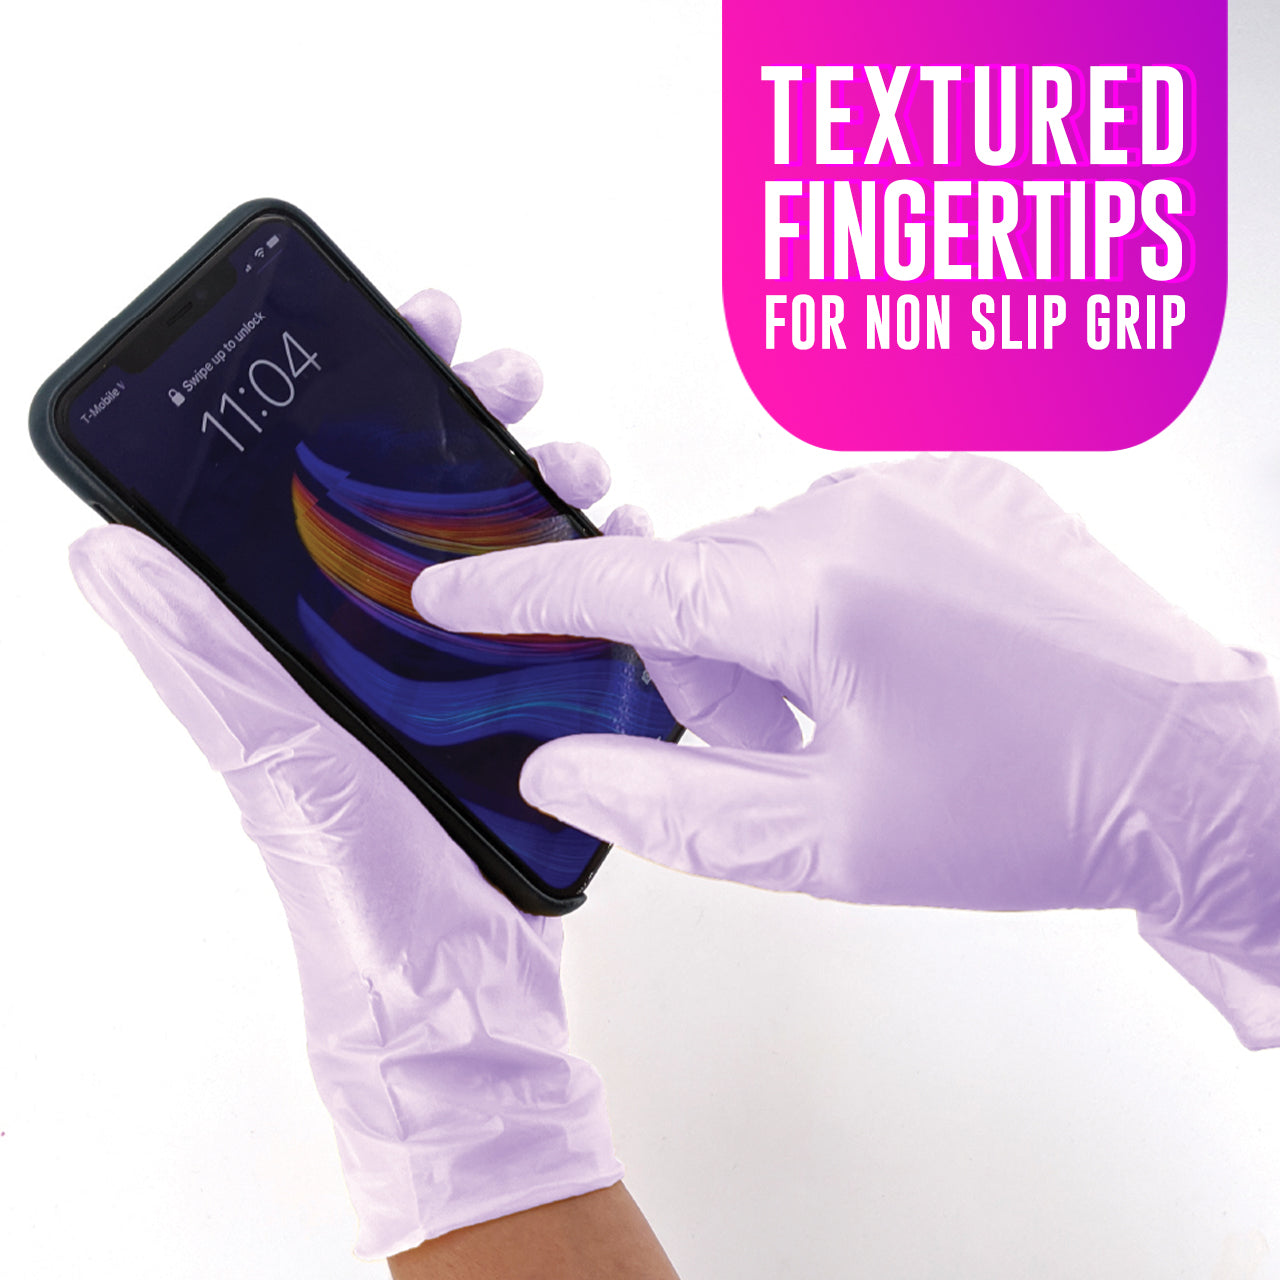 Luminous Collection Nitrile Gloves | Lilac Frost